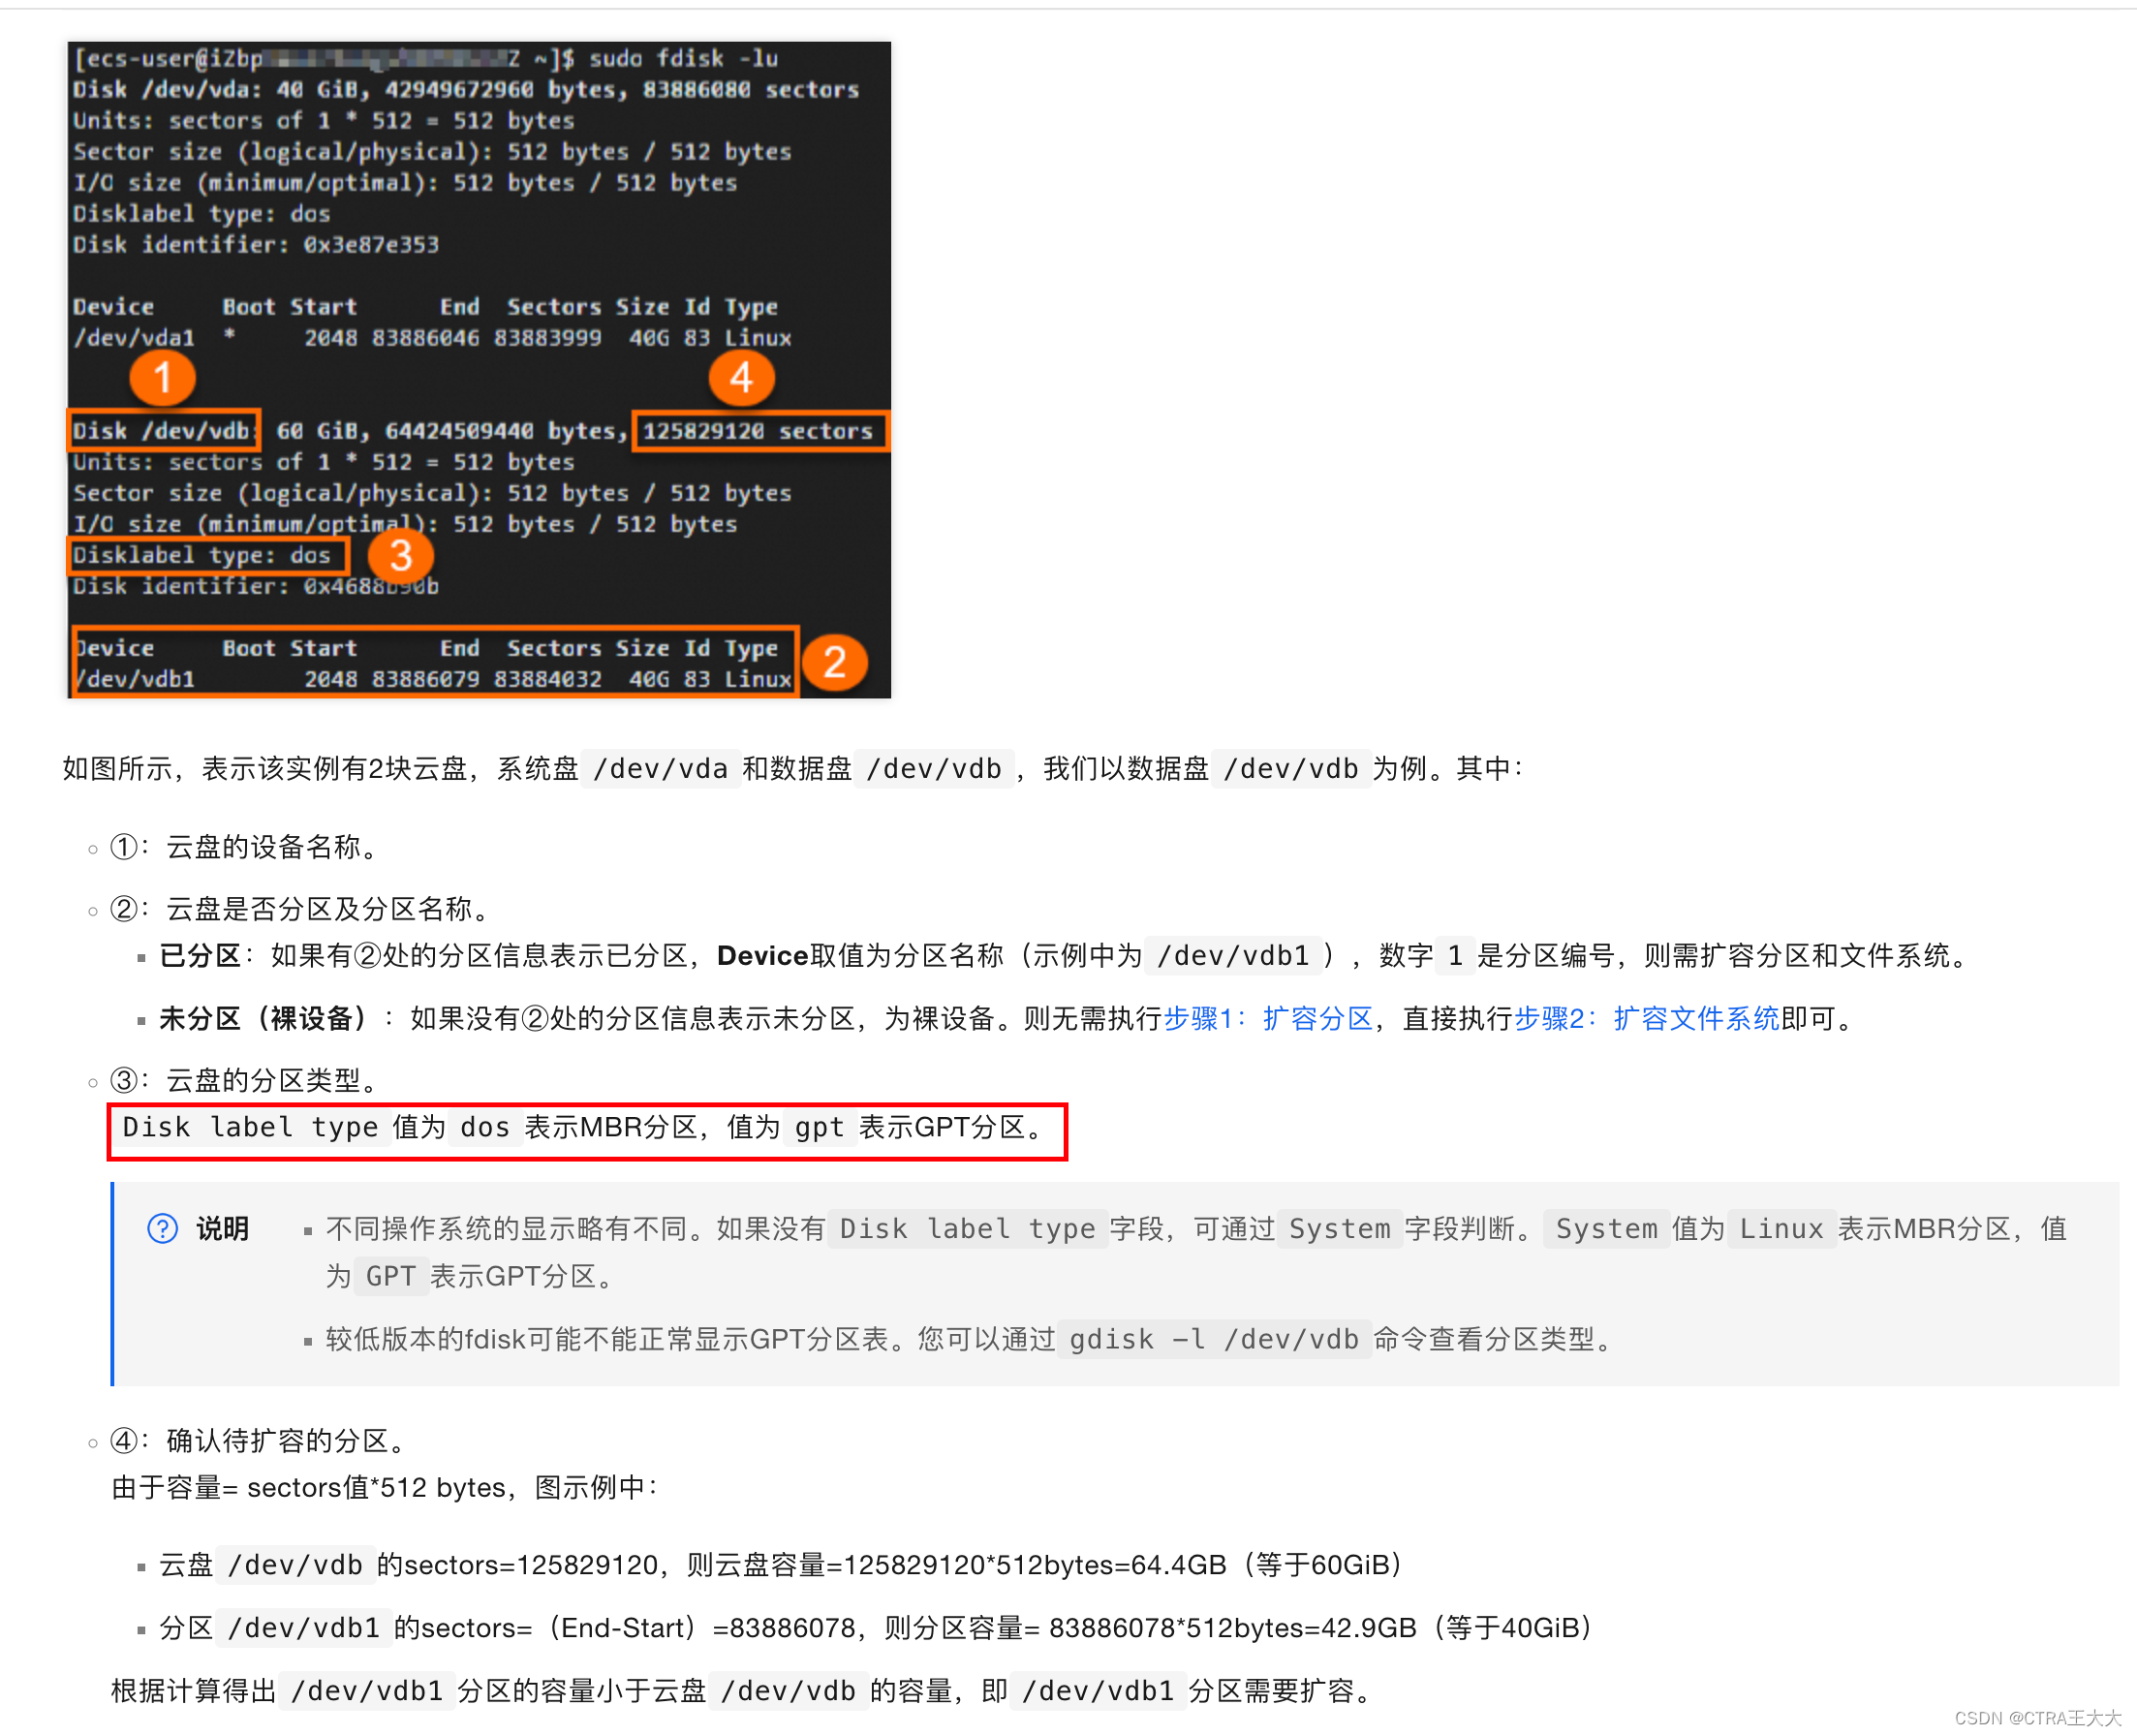 【devops】 阿里<span style='color:red;'>云</span>挂载<span style='color:red;'>云</span>盘 | <span style='color:red;'>扩展</span>系统<span style='color:red;'>硬盘</span> | 不重启服务器<span style='color:red;'>增加</span><span style='color:red;'>硬盘</span>容量